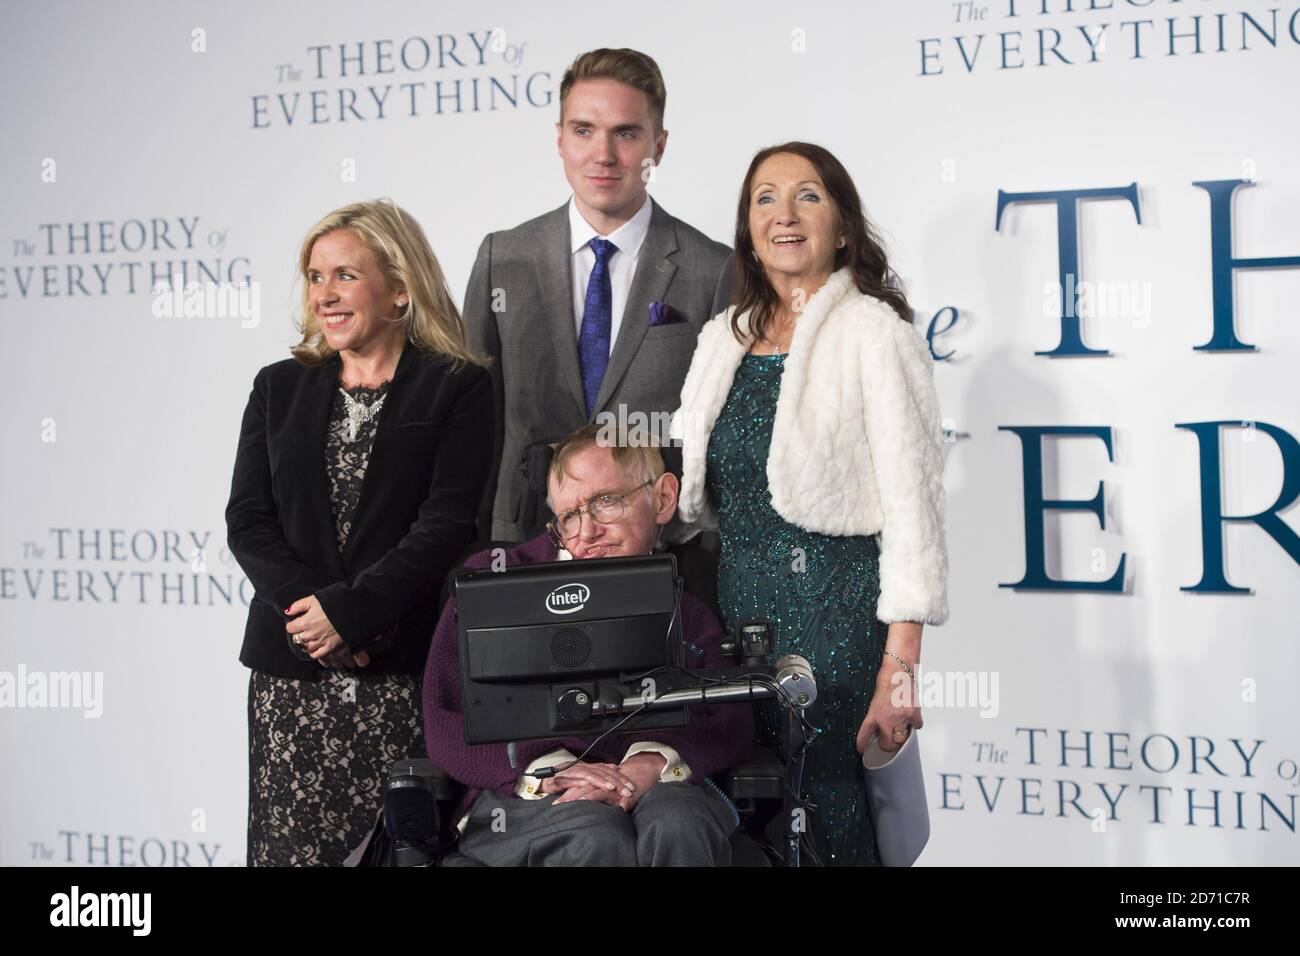 Stephen Hawking, Lucy Hawking (left) and Jane Wilde Hawking attending the UK Premiere of The Theory of Everything at the Odeon Leicester Square, London. Stock Photo